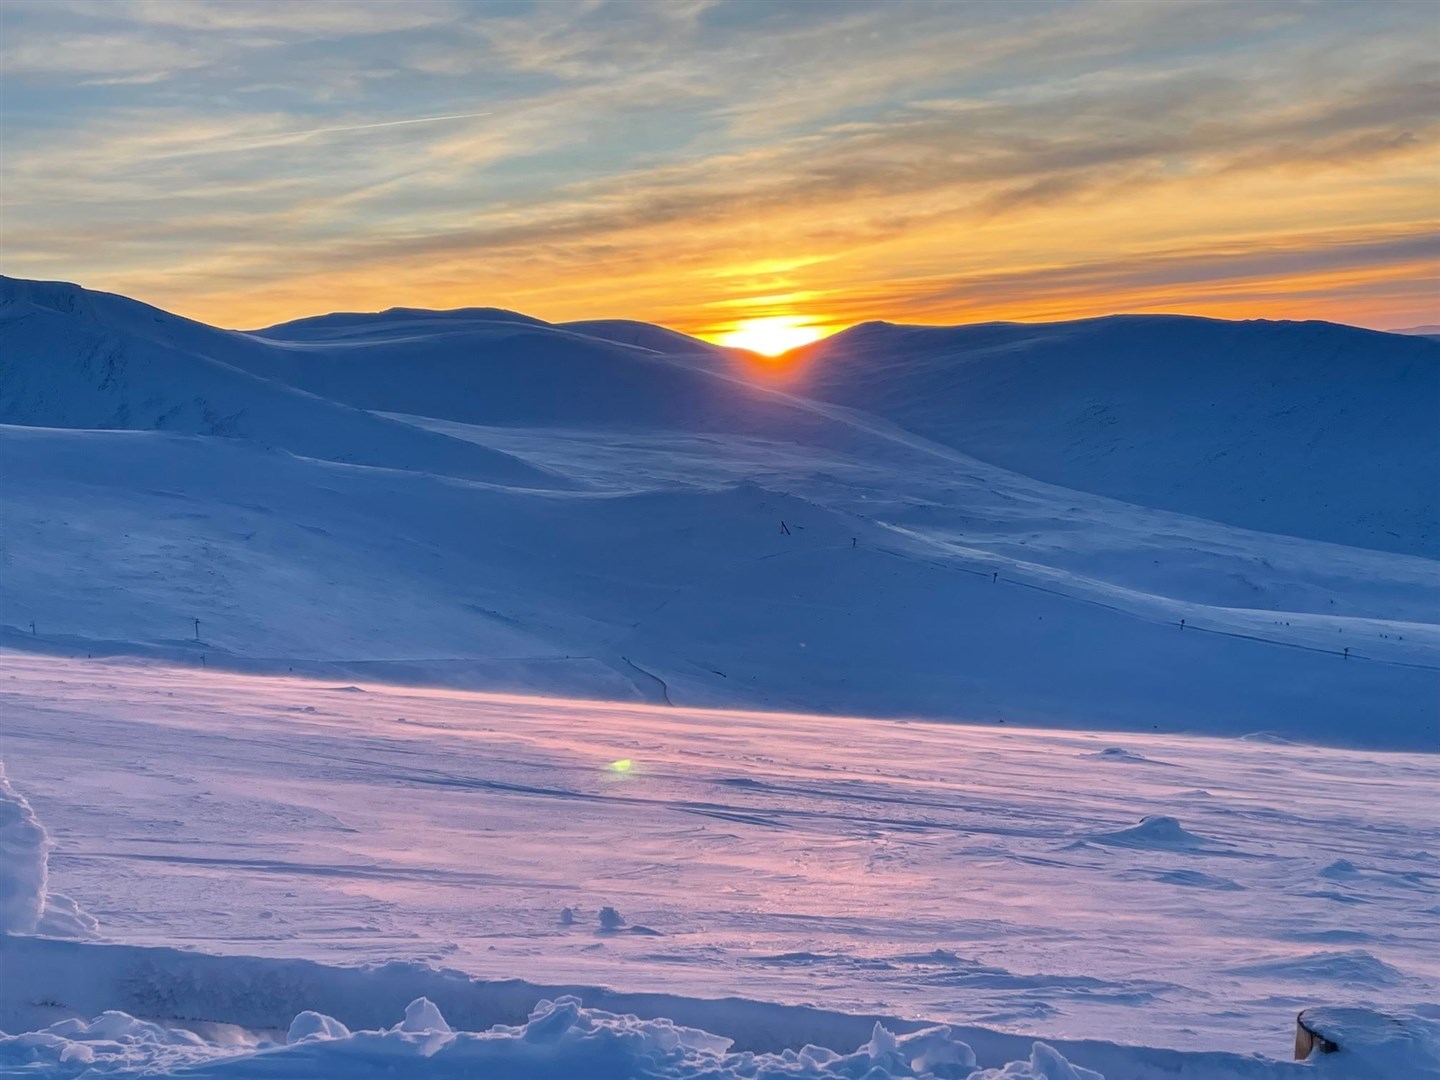 Make memories... an unforgettable sunset over the Cairngorms.